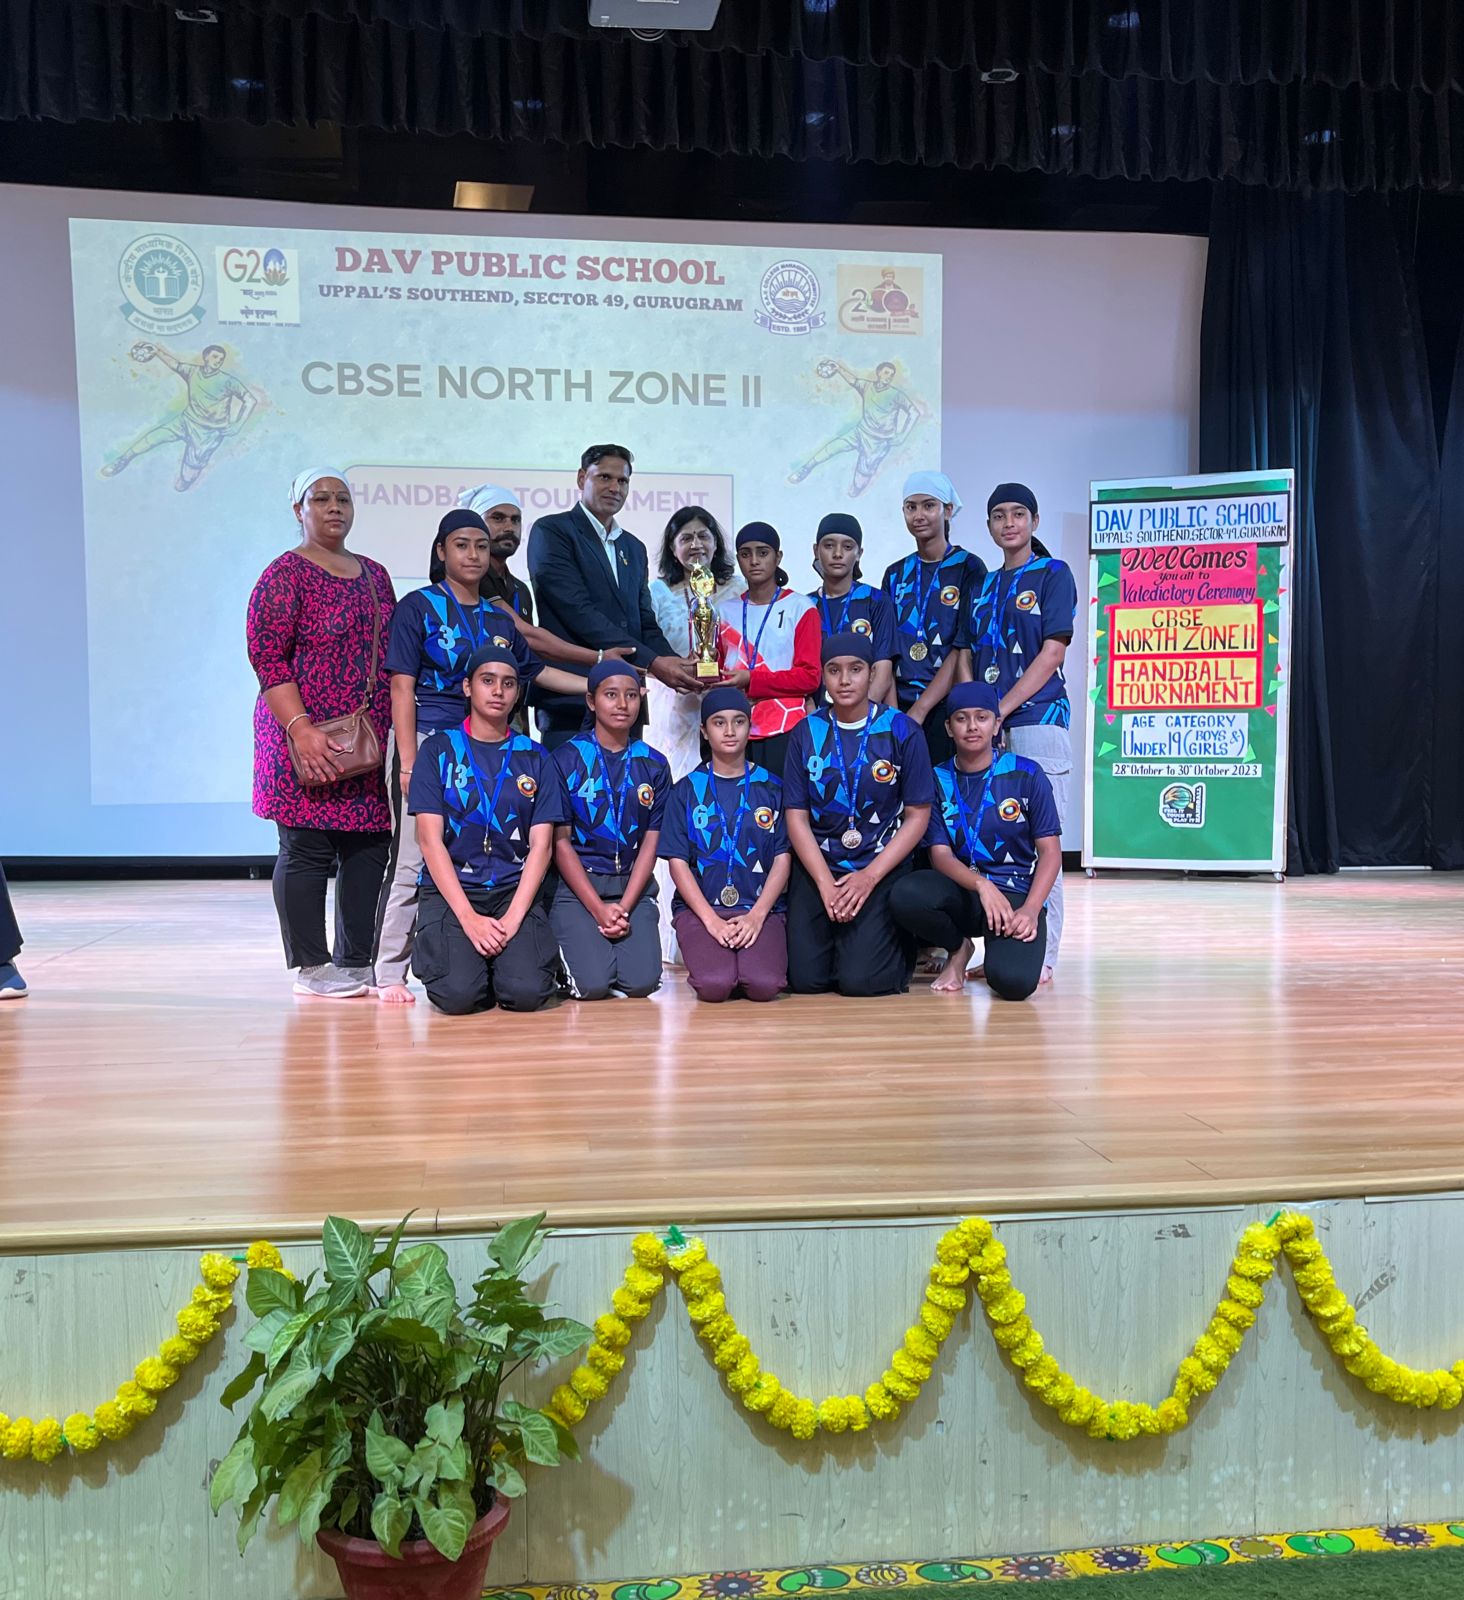 Amritians showcased their dexterity as their U-19 girls lifted the first runners up trophy in Handball CBSE Cluster 18 North Zone held at D.A.V Public School, Sector-49, Gurugram.